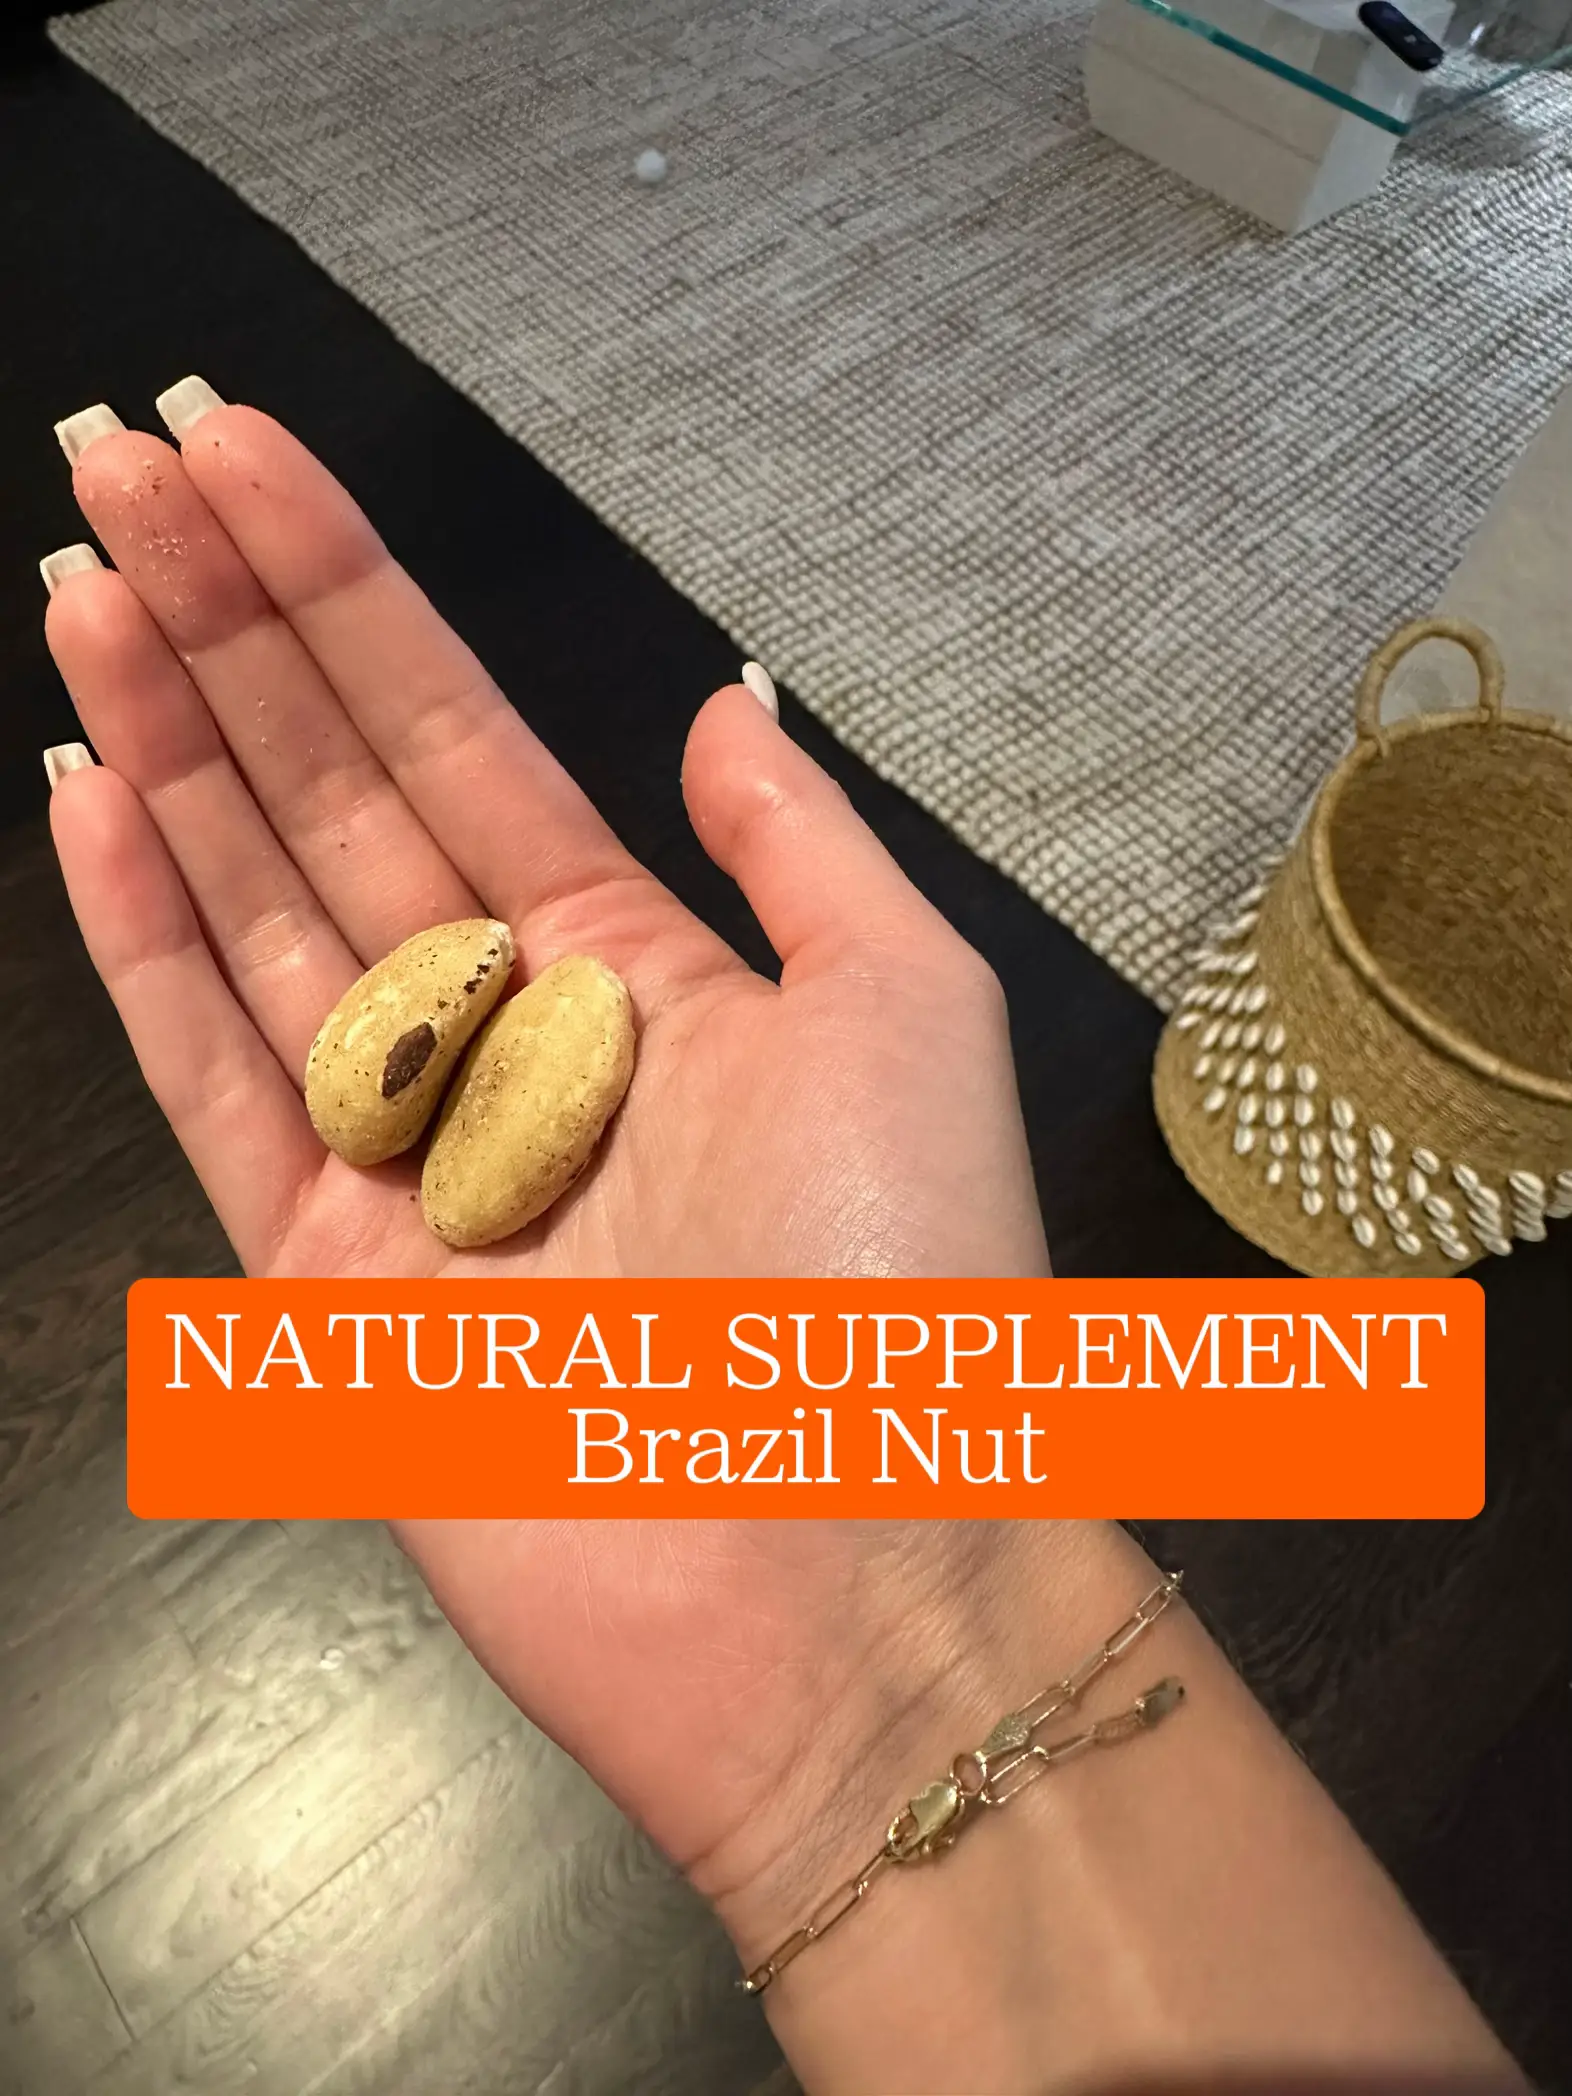 🚨NEW ITEM🚨 Brazil Nut Body Wash! This was a nice surprise. Had